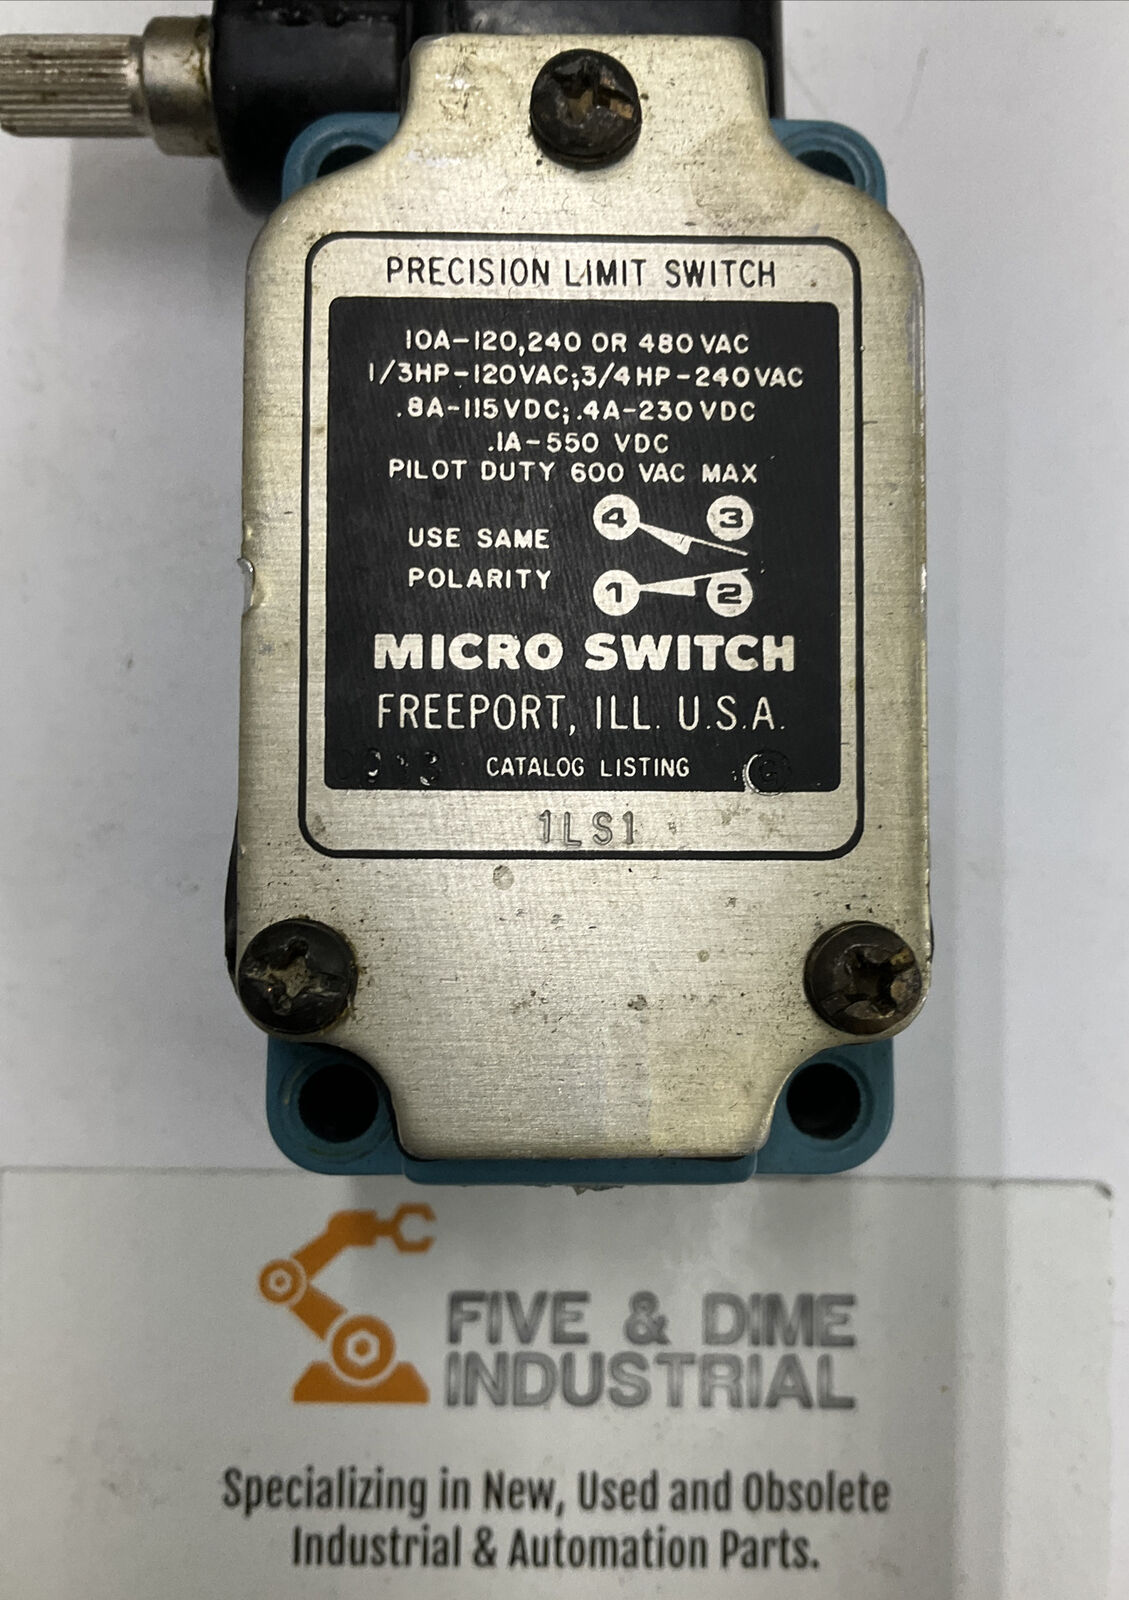 Honeywell Microswitch 1LS1 Precision Limit Switch (CL143) - 0